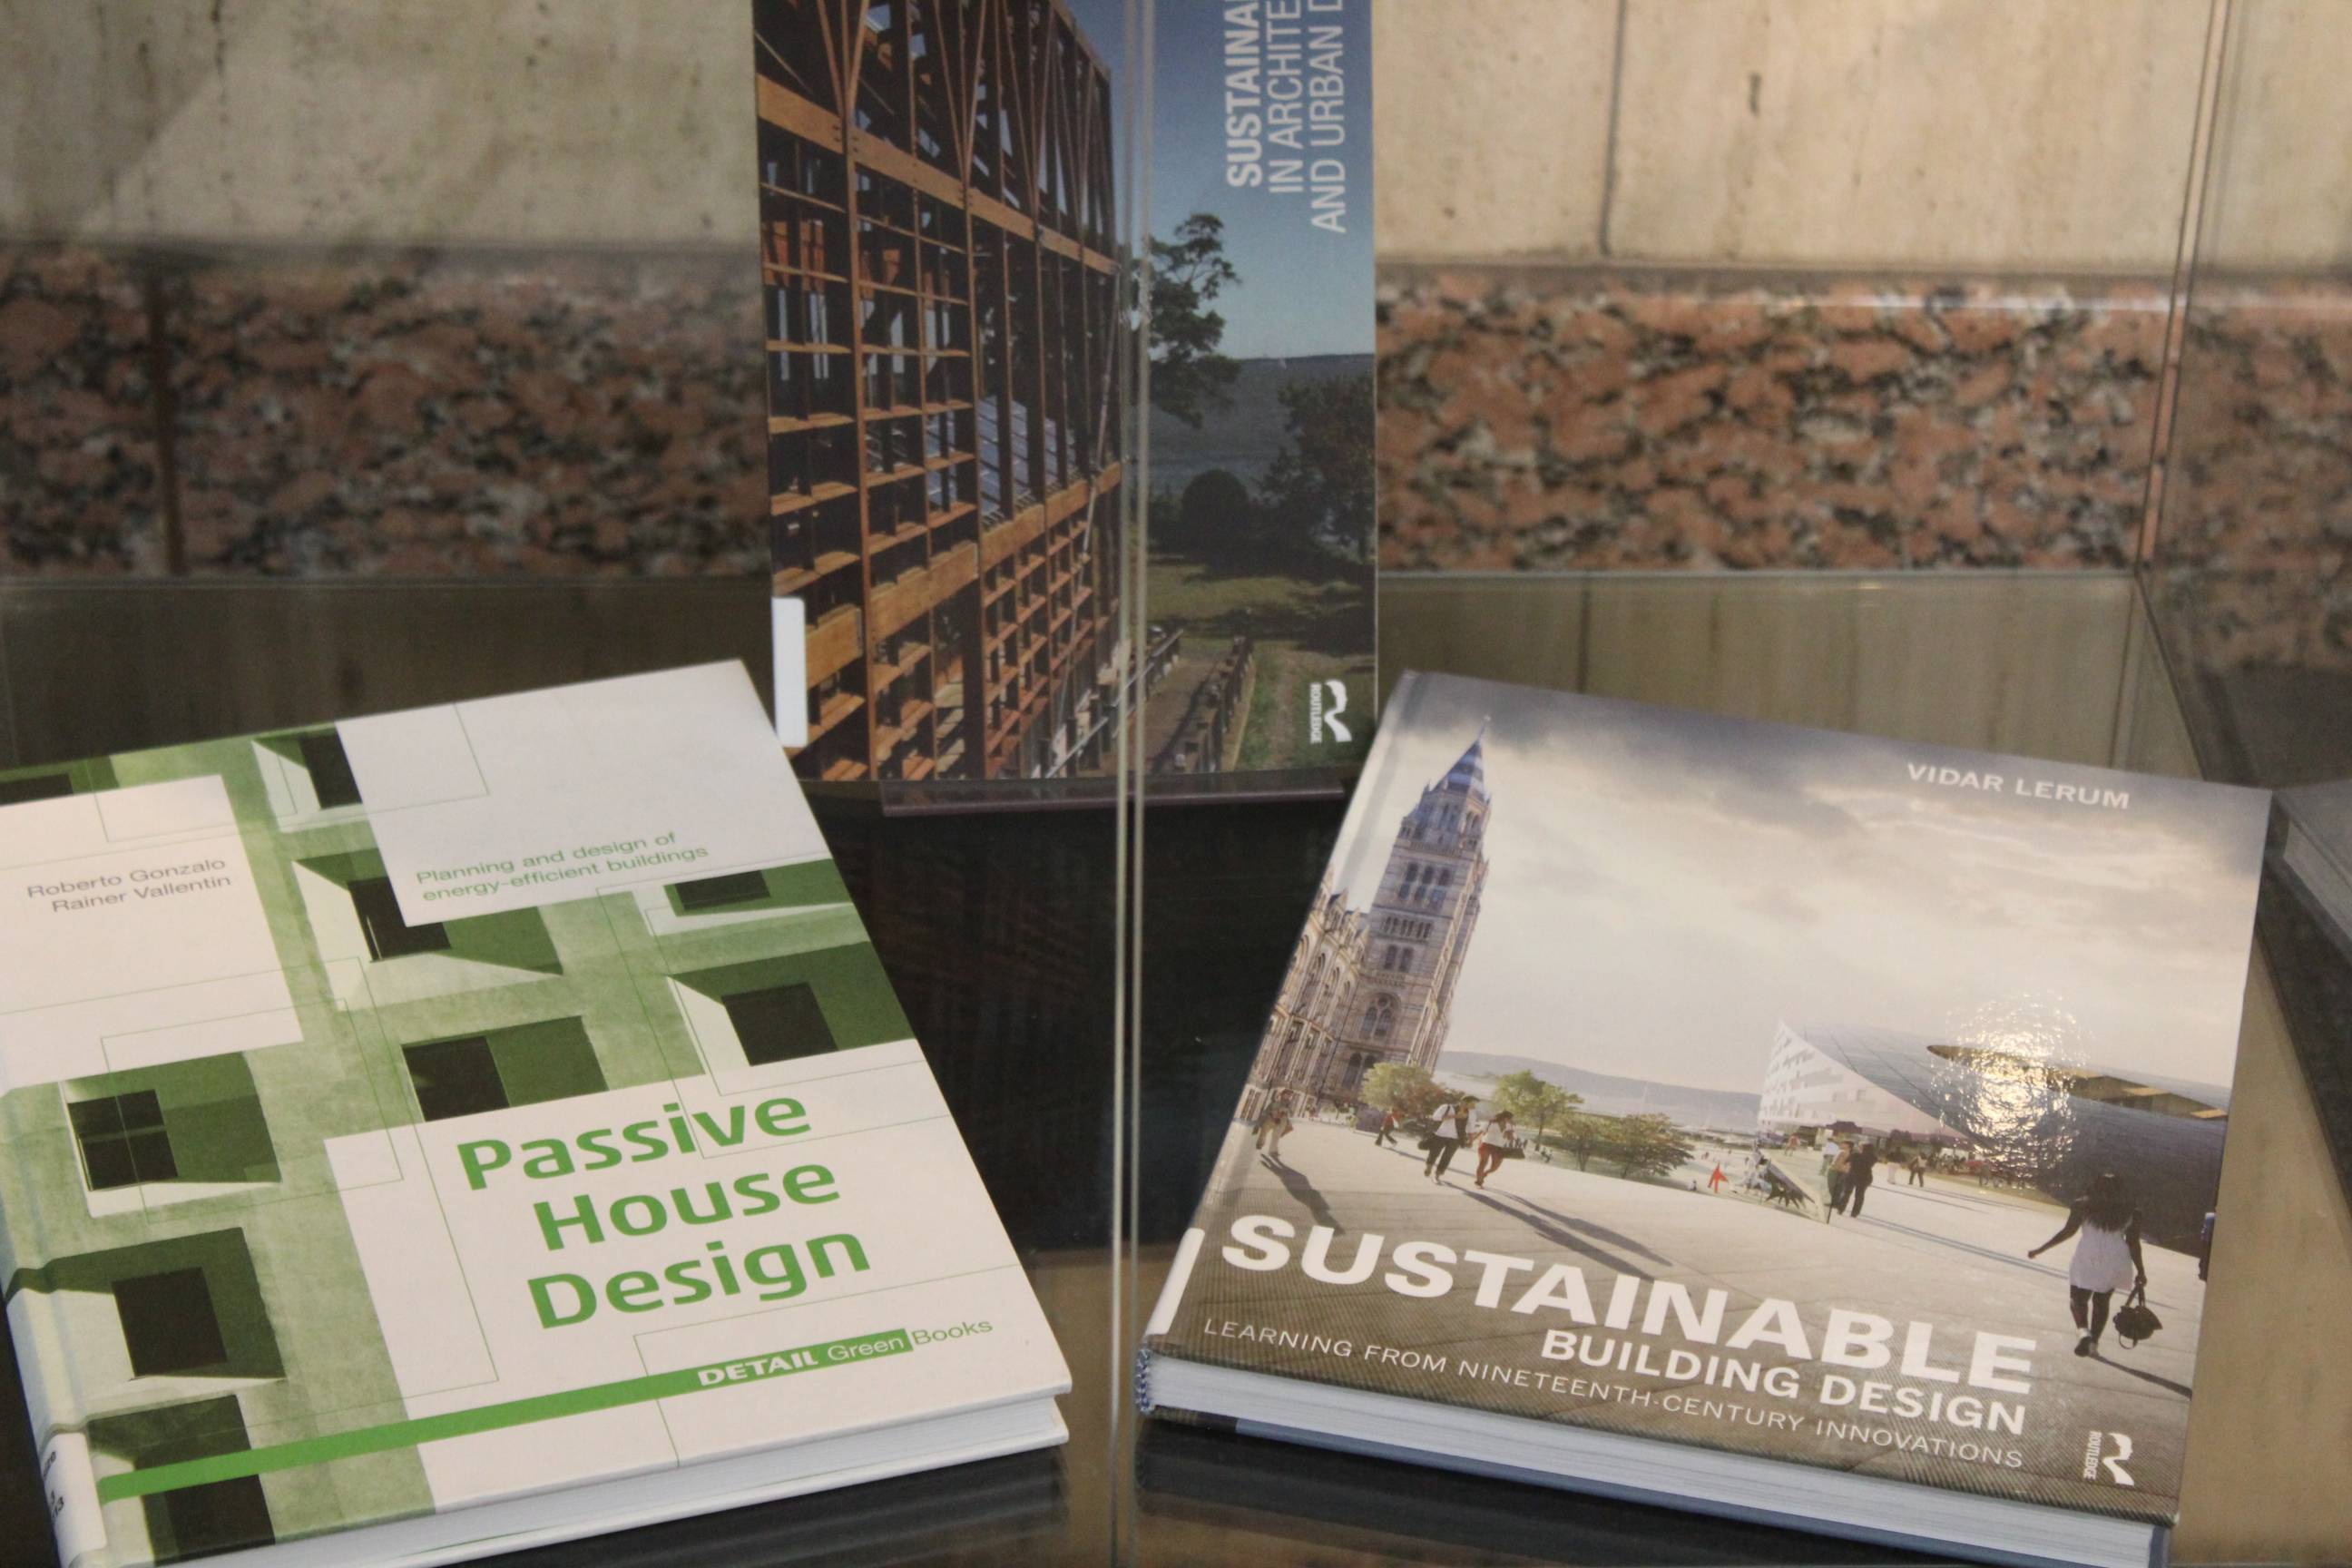 Sustainable Architecture book titles